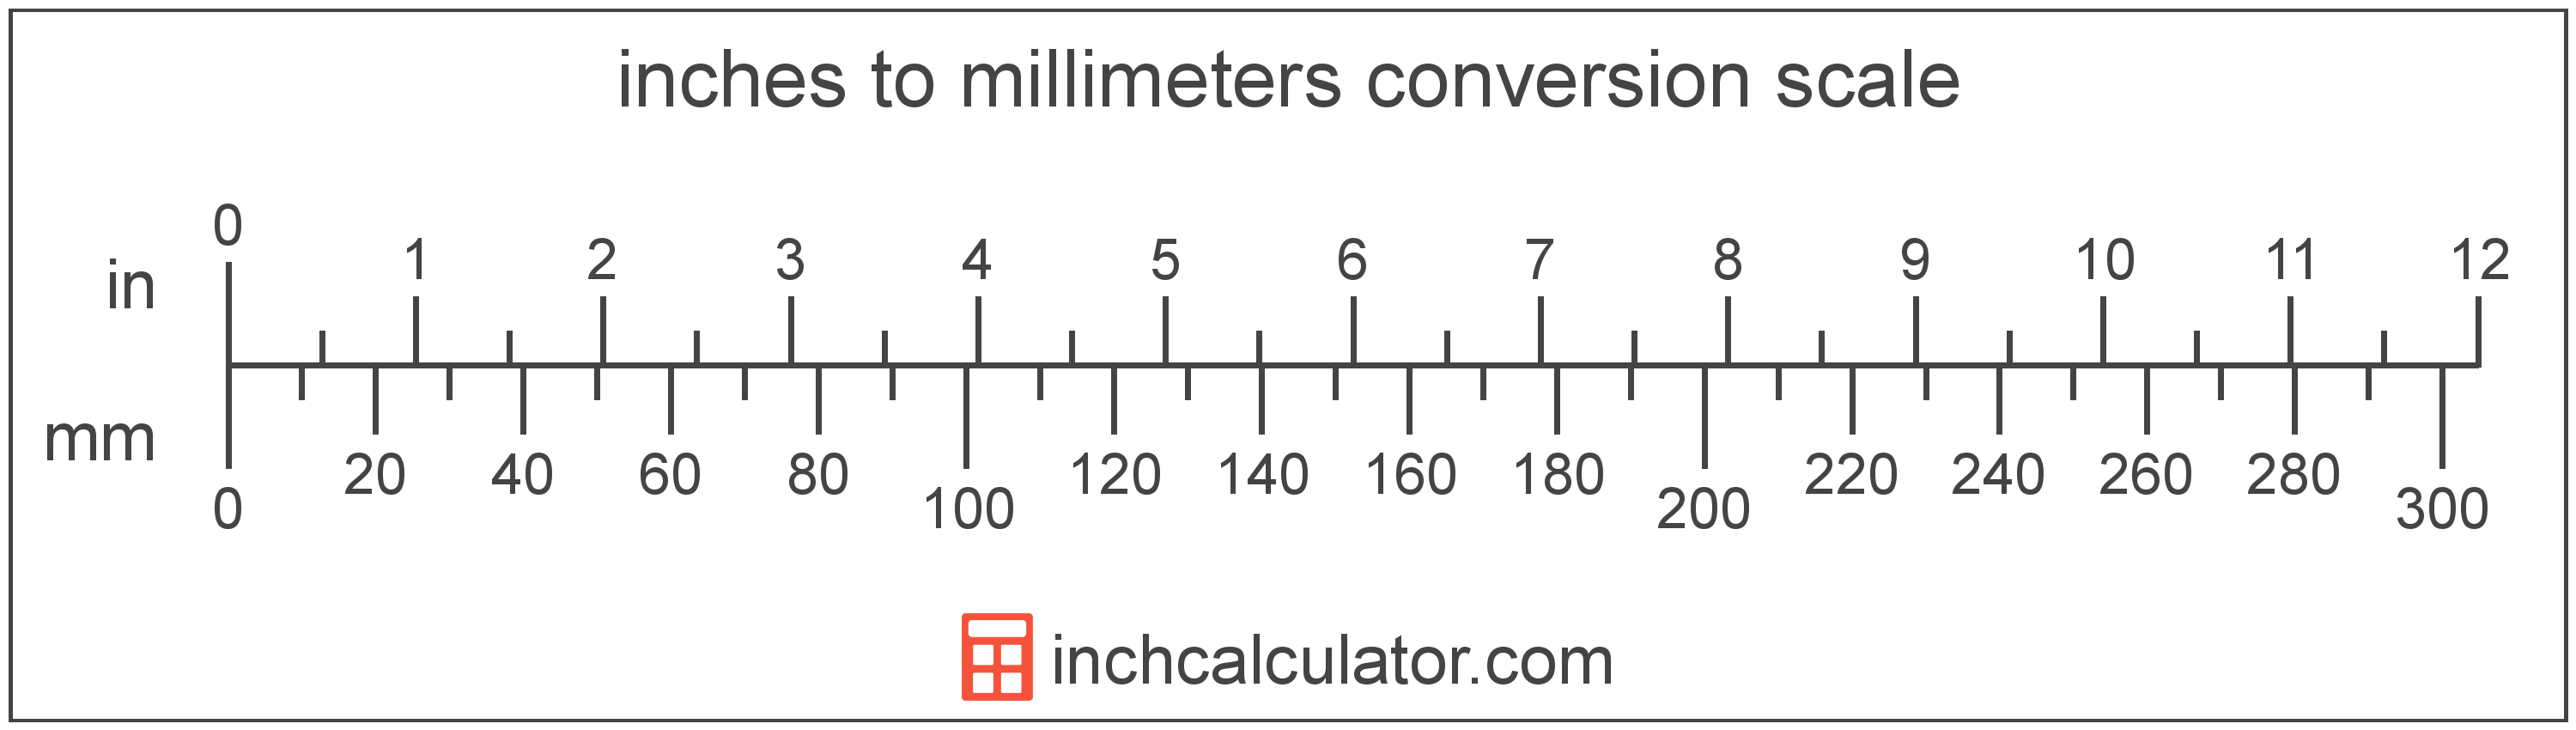 Inch To Millimeter Conversion Scale 